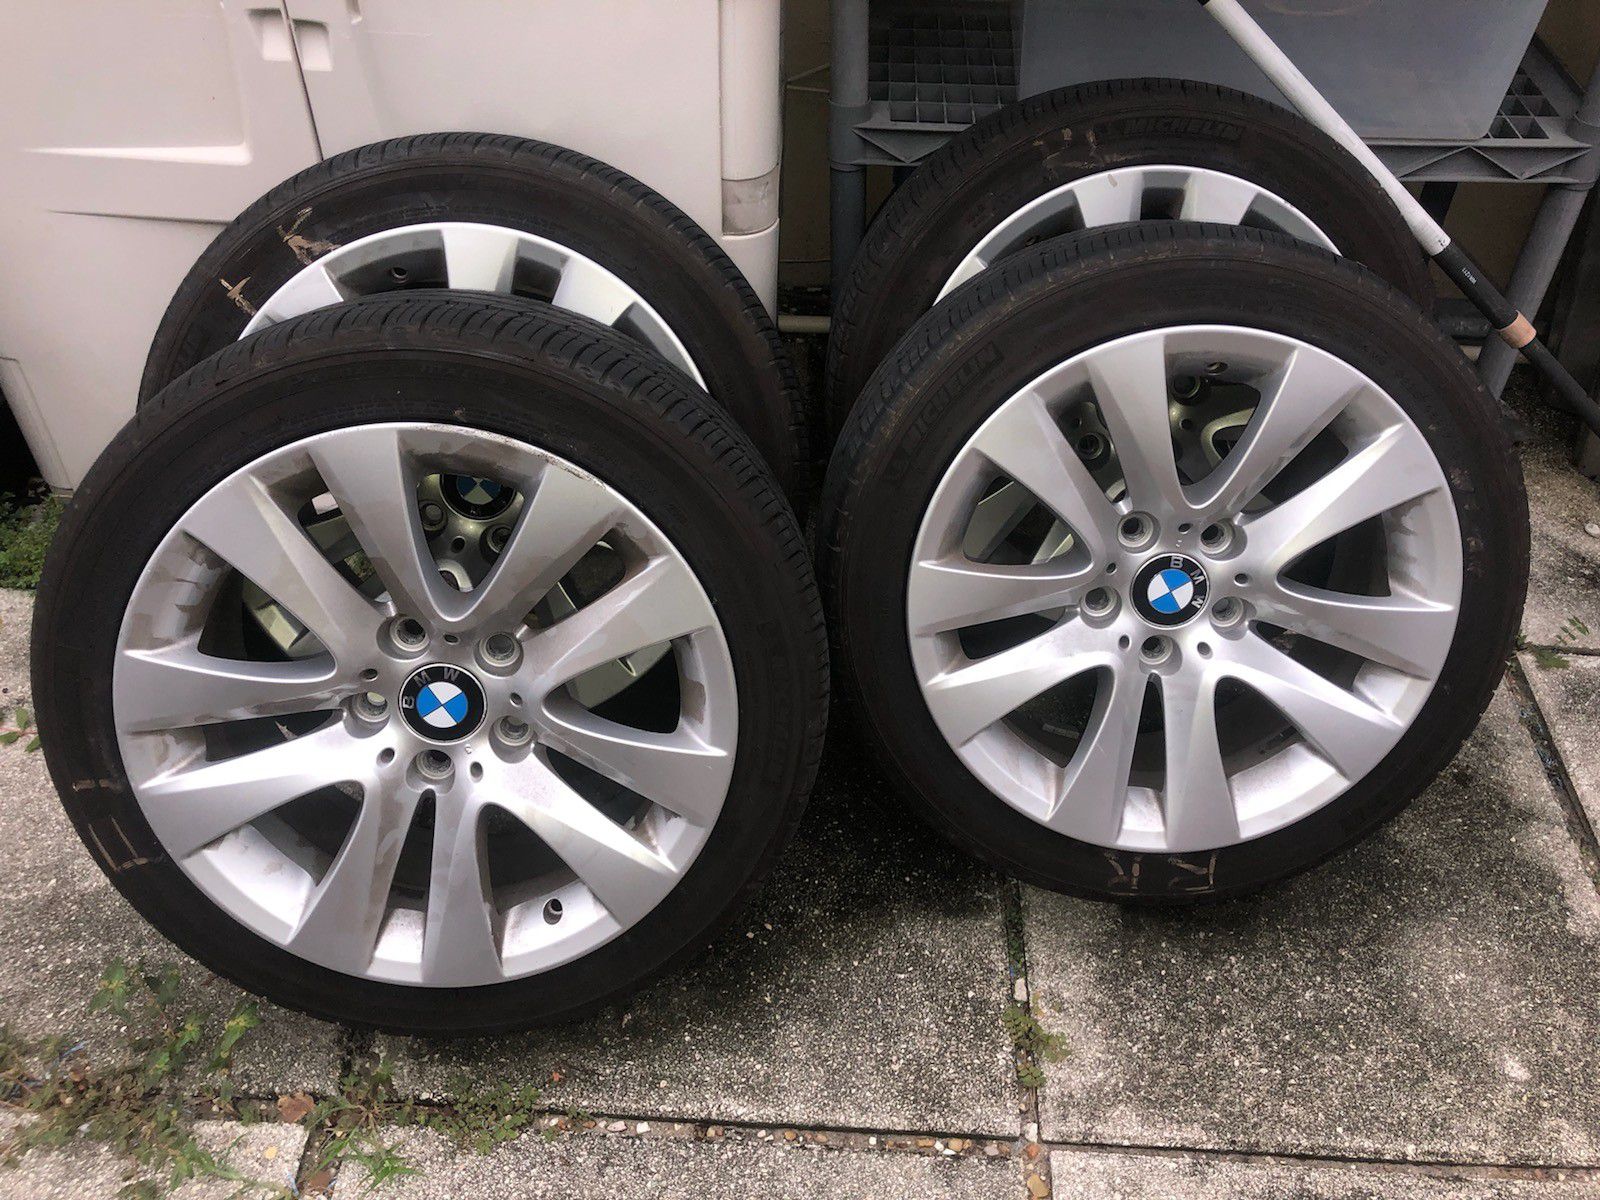 328I Rims on Michelin tires